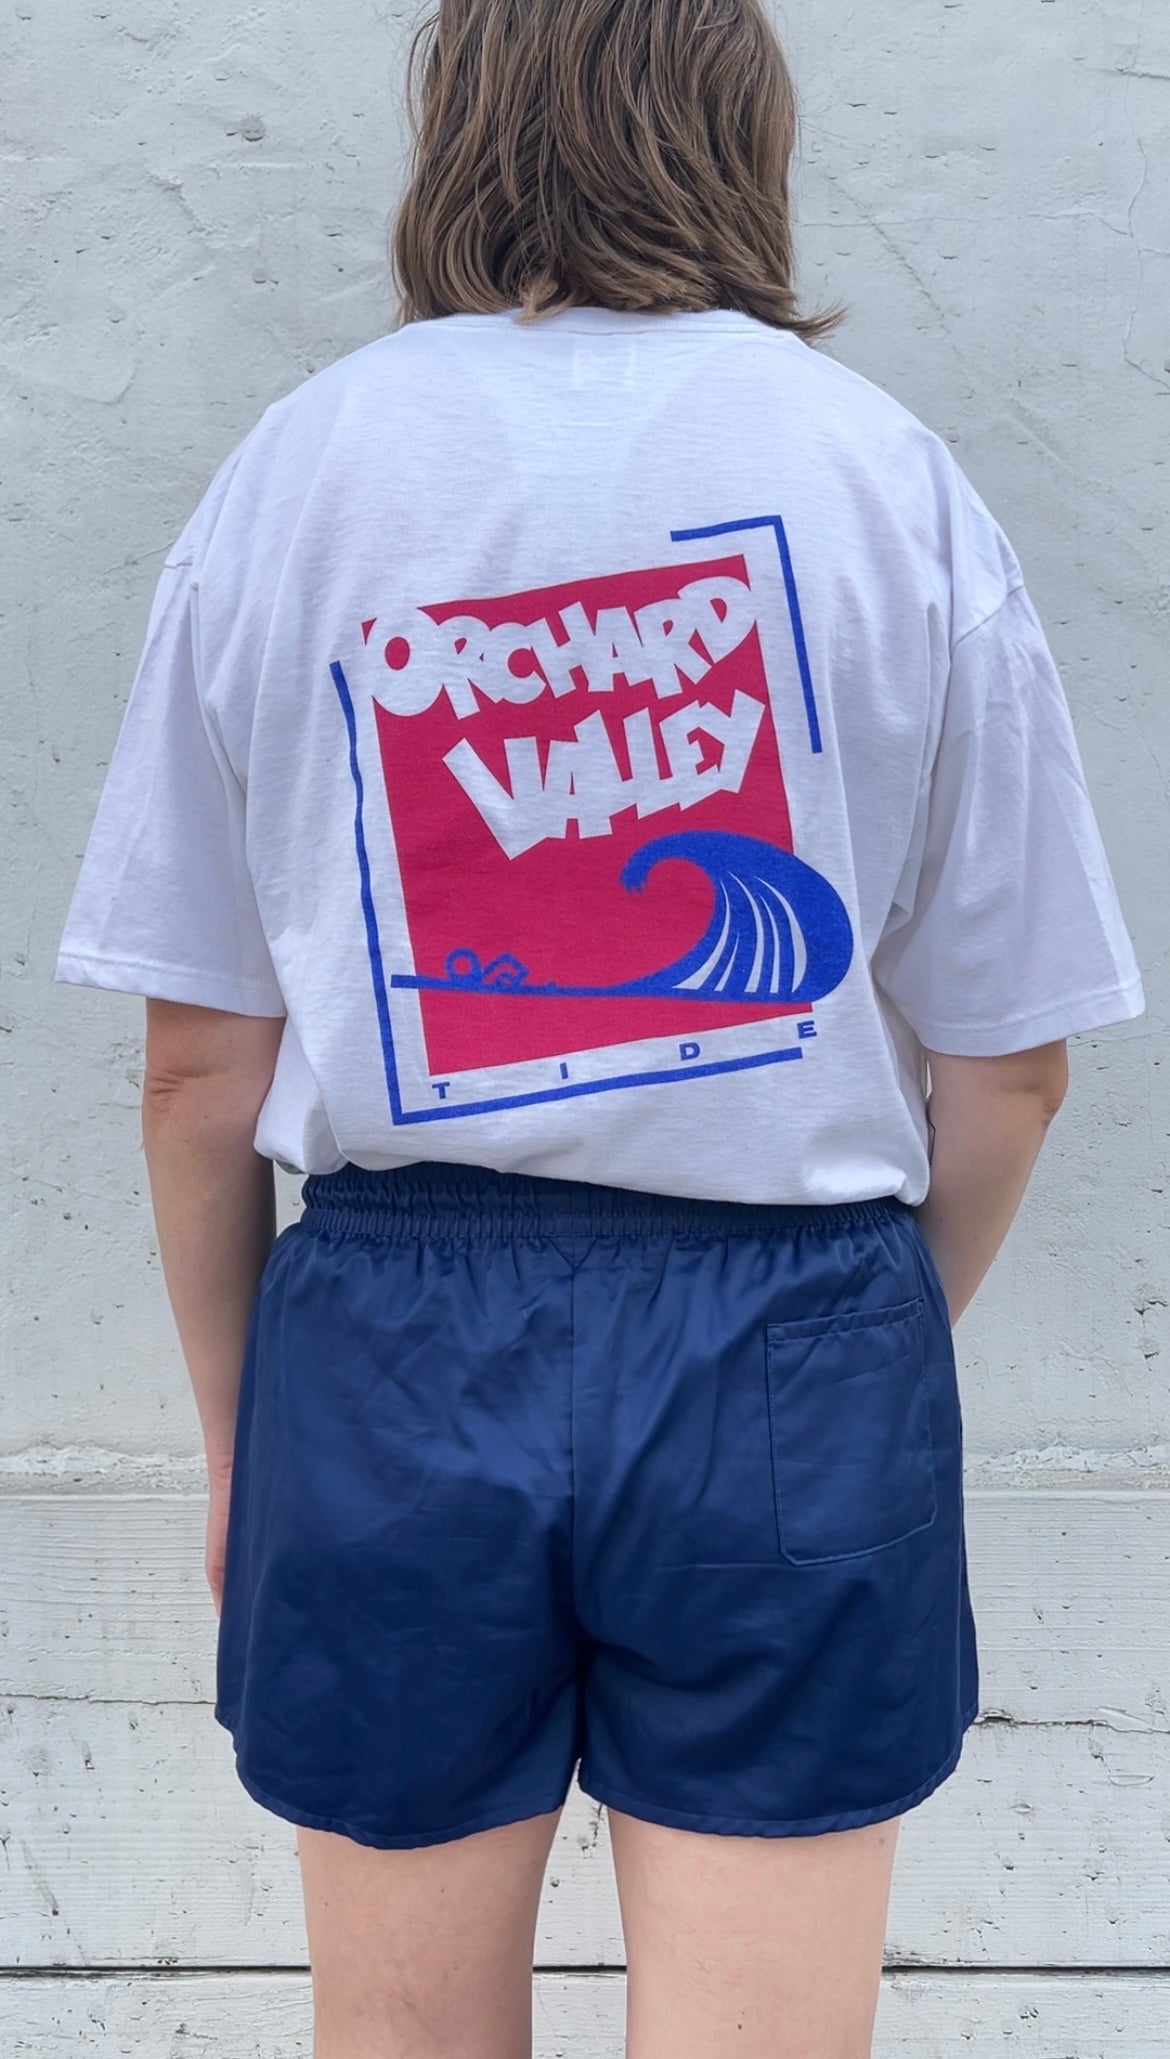 90s Jerzees Heavyweight "Orchard Valley Tide" tee